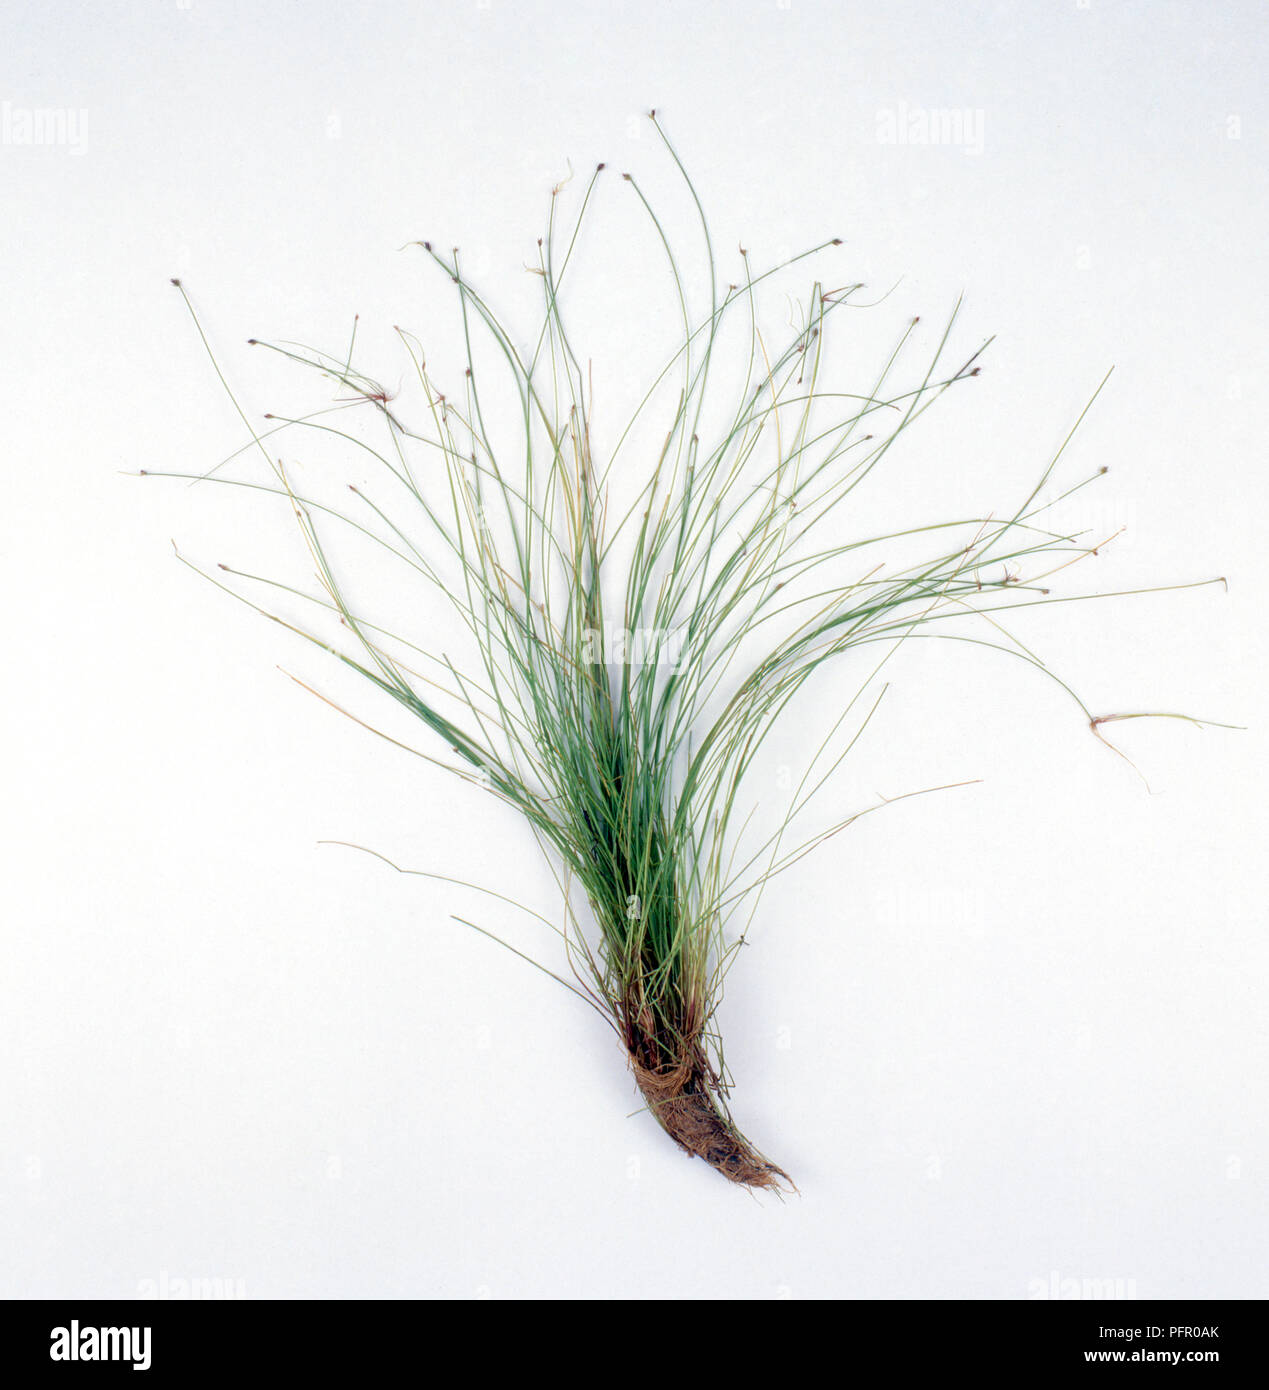 Deschampsia (Hair Grass, Tussock Grass) with small flowers and exposed roots Stock Photo